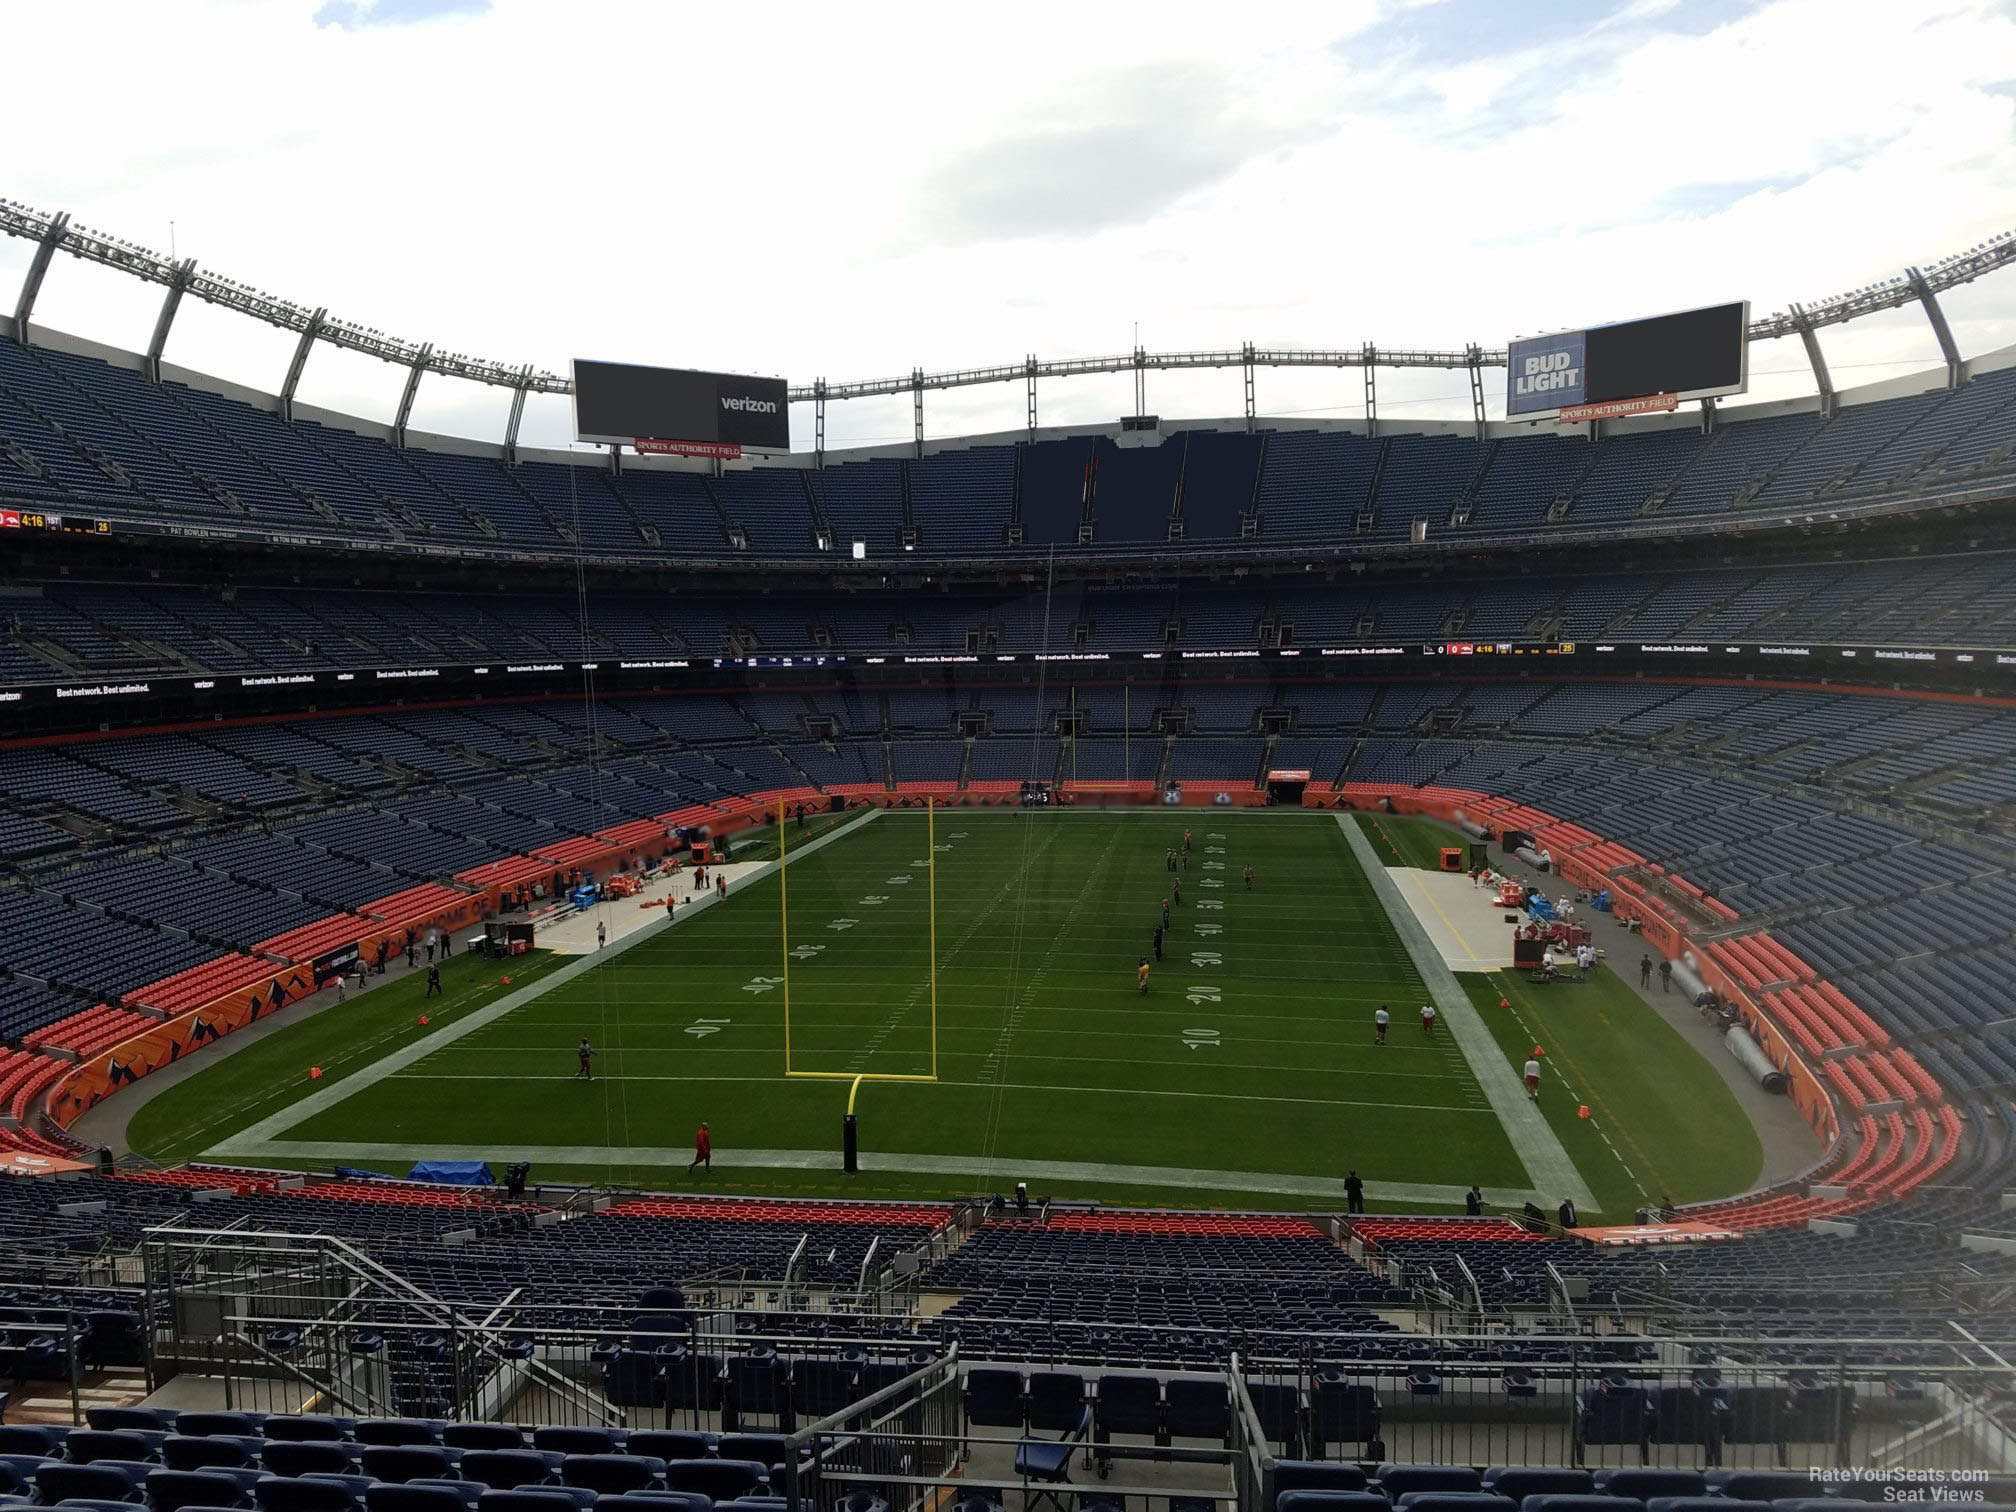 section 231, row 16 seat view  - empower field (at mile high)